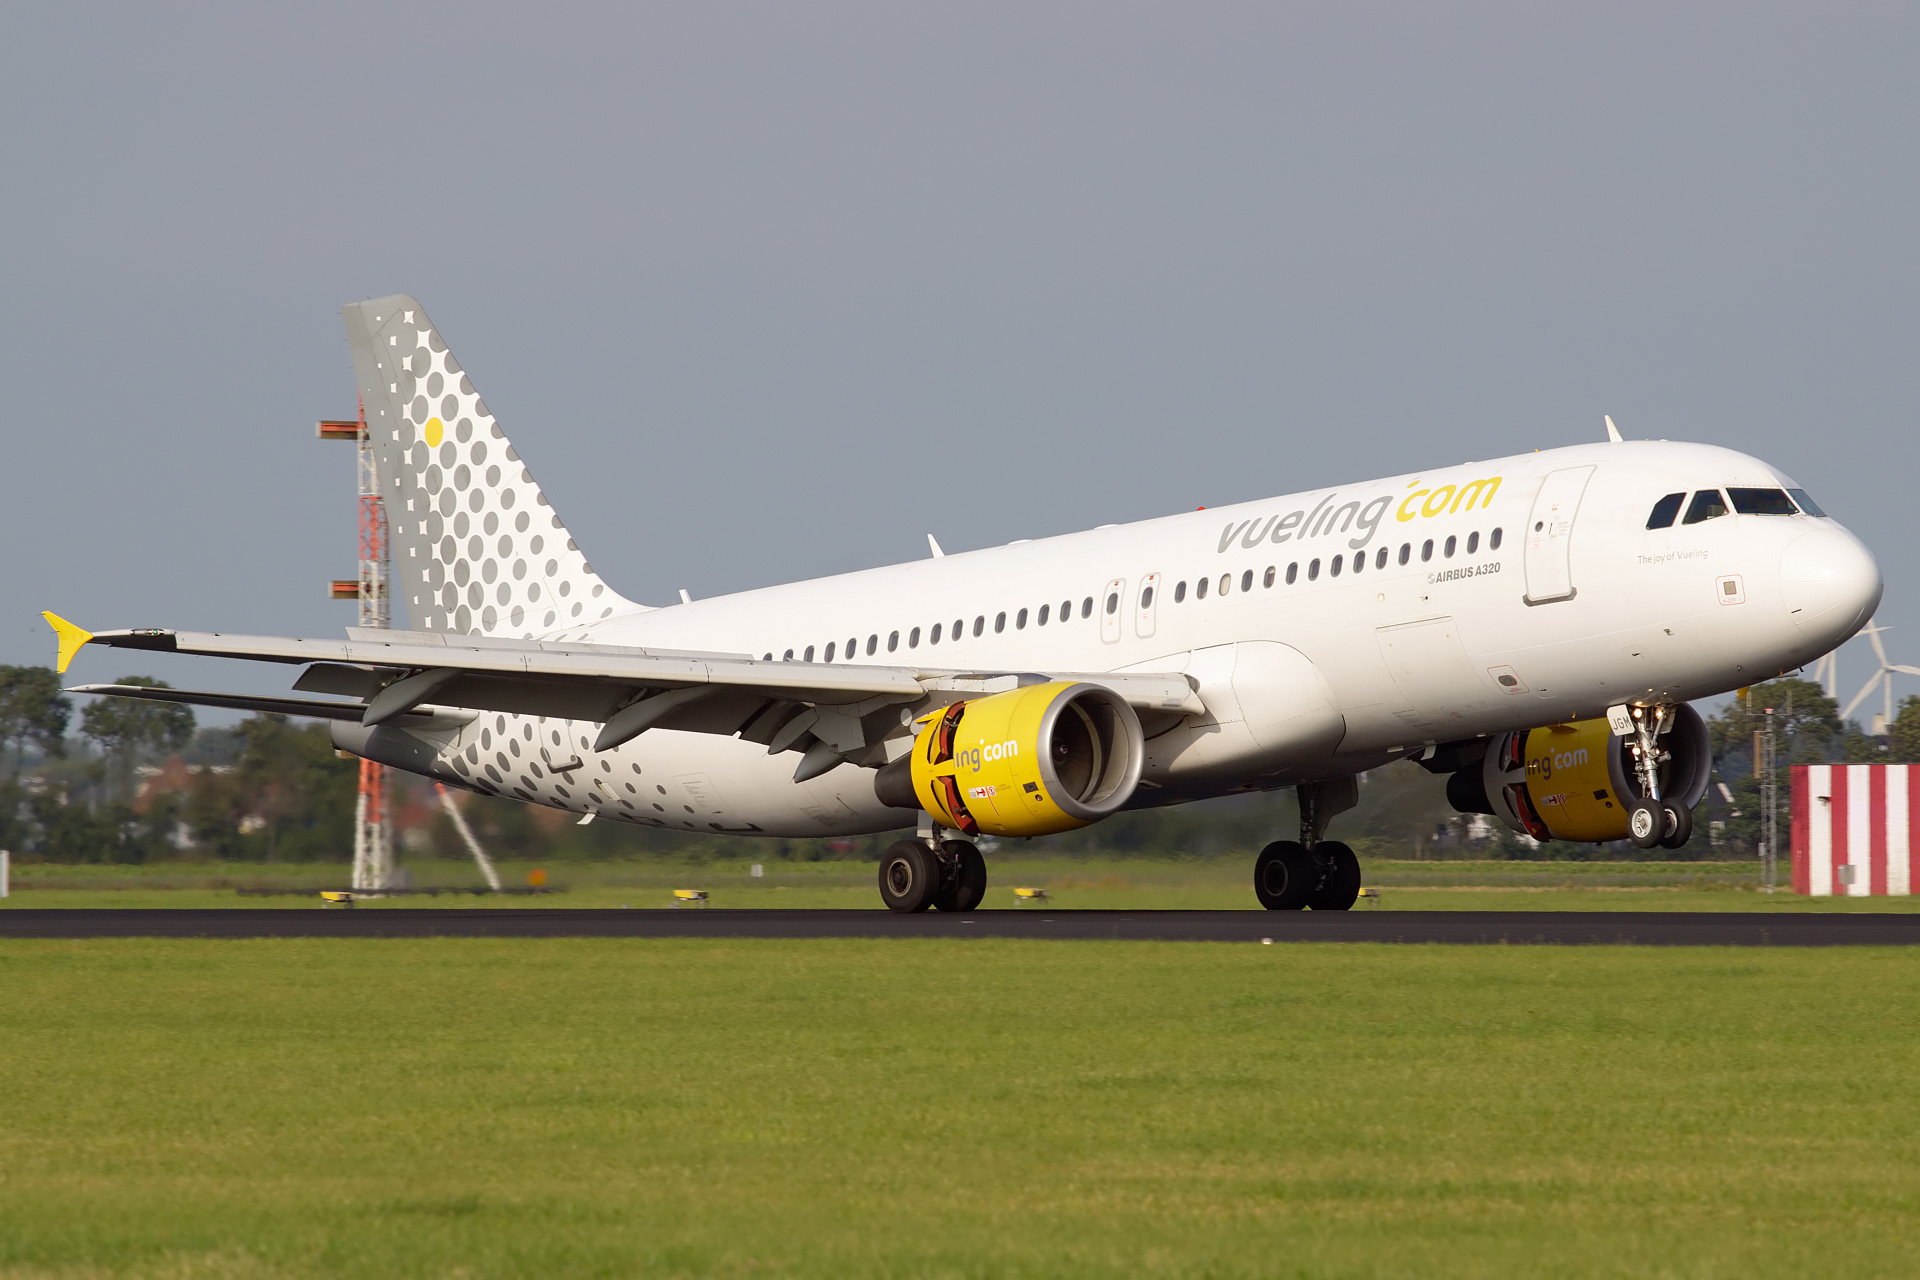 EC-JGM (Samoloty » Spotting na Schiphol » Airbus A320-200 » Vueling Airlines)